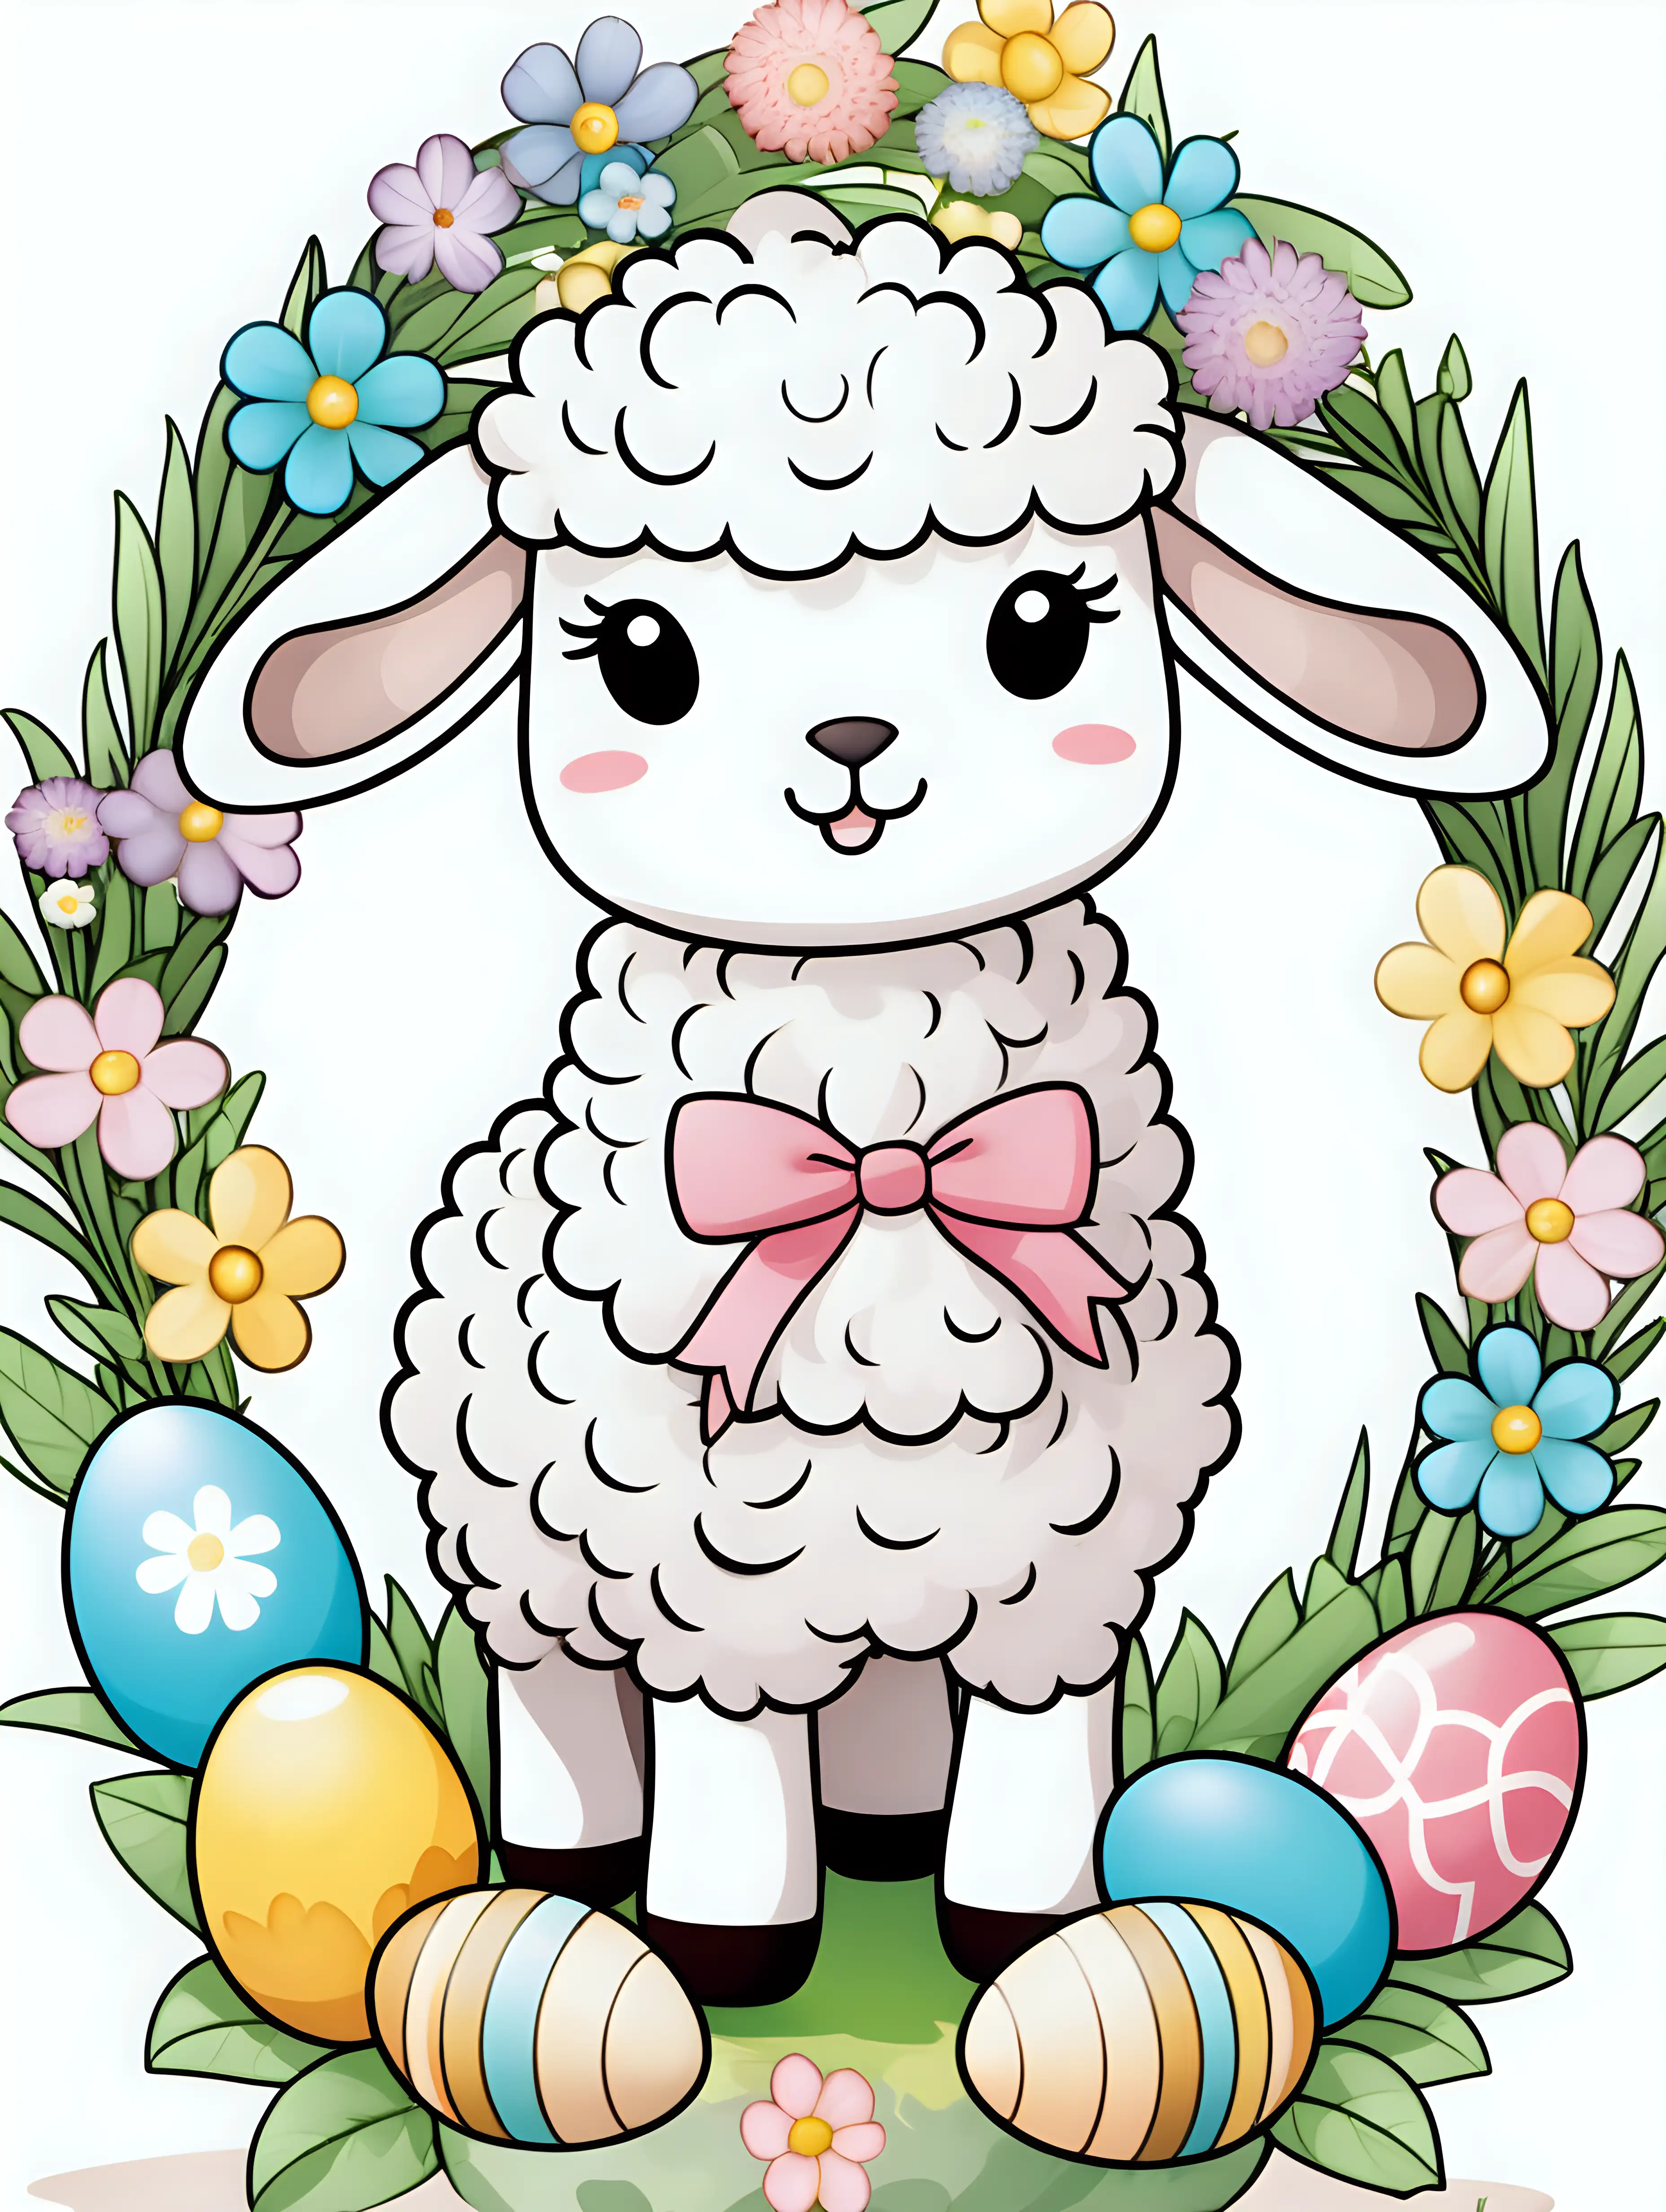 Adorable Easter Lamb Surrounded by Flower Wreath and Eggs